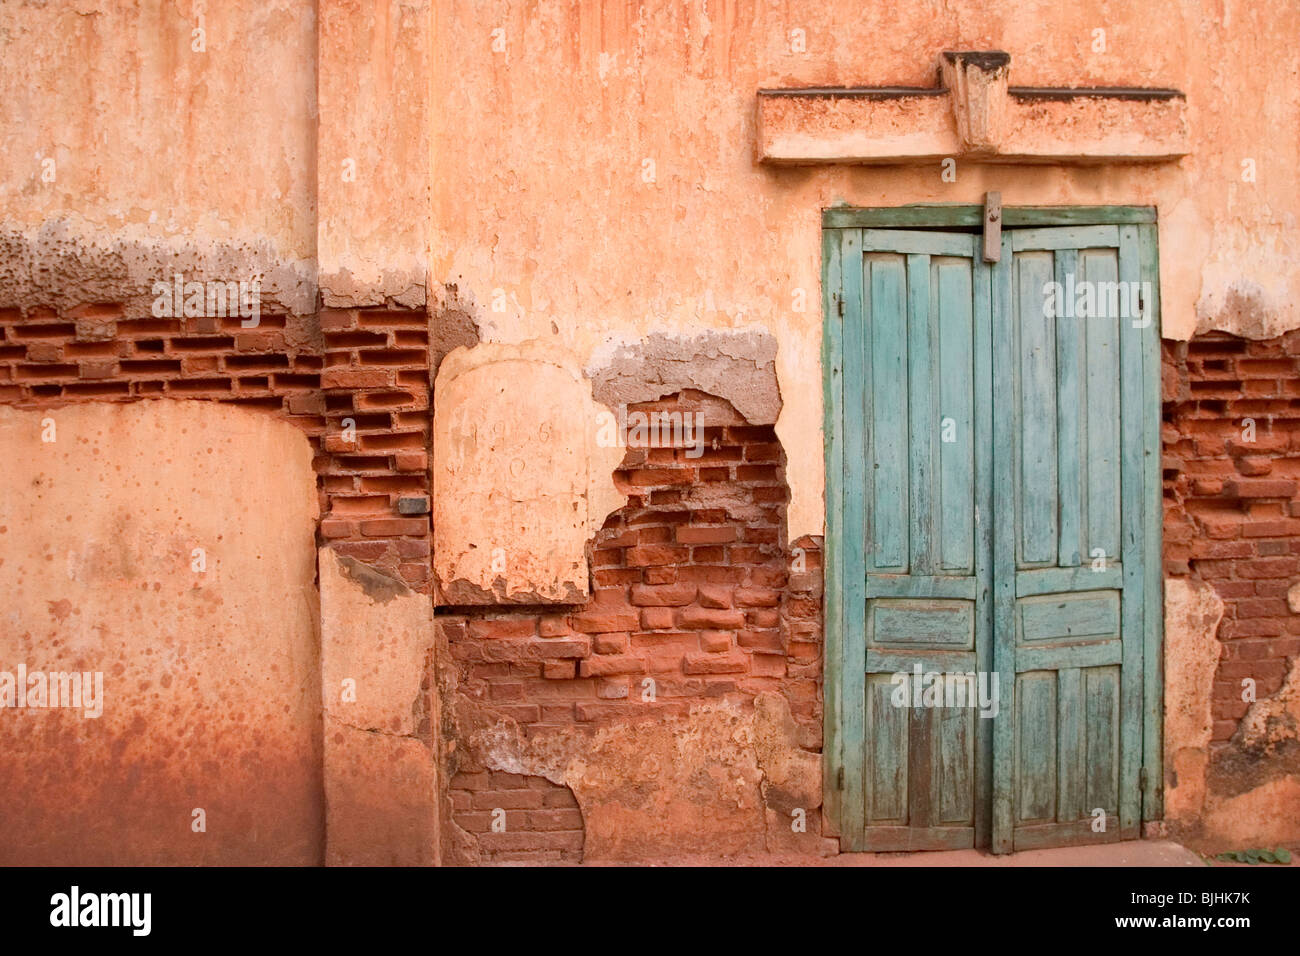 The wall and doors of an old French-era building in Savannakhet, Lao People's Democratic Republic. Stock Photo